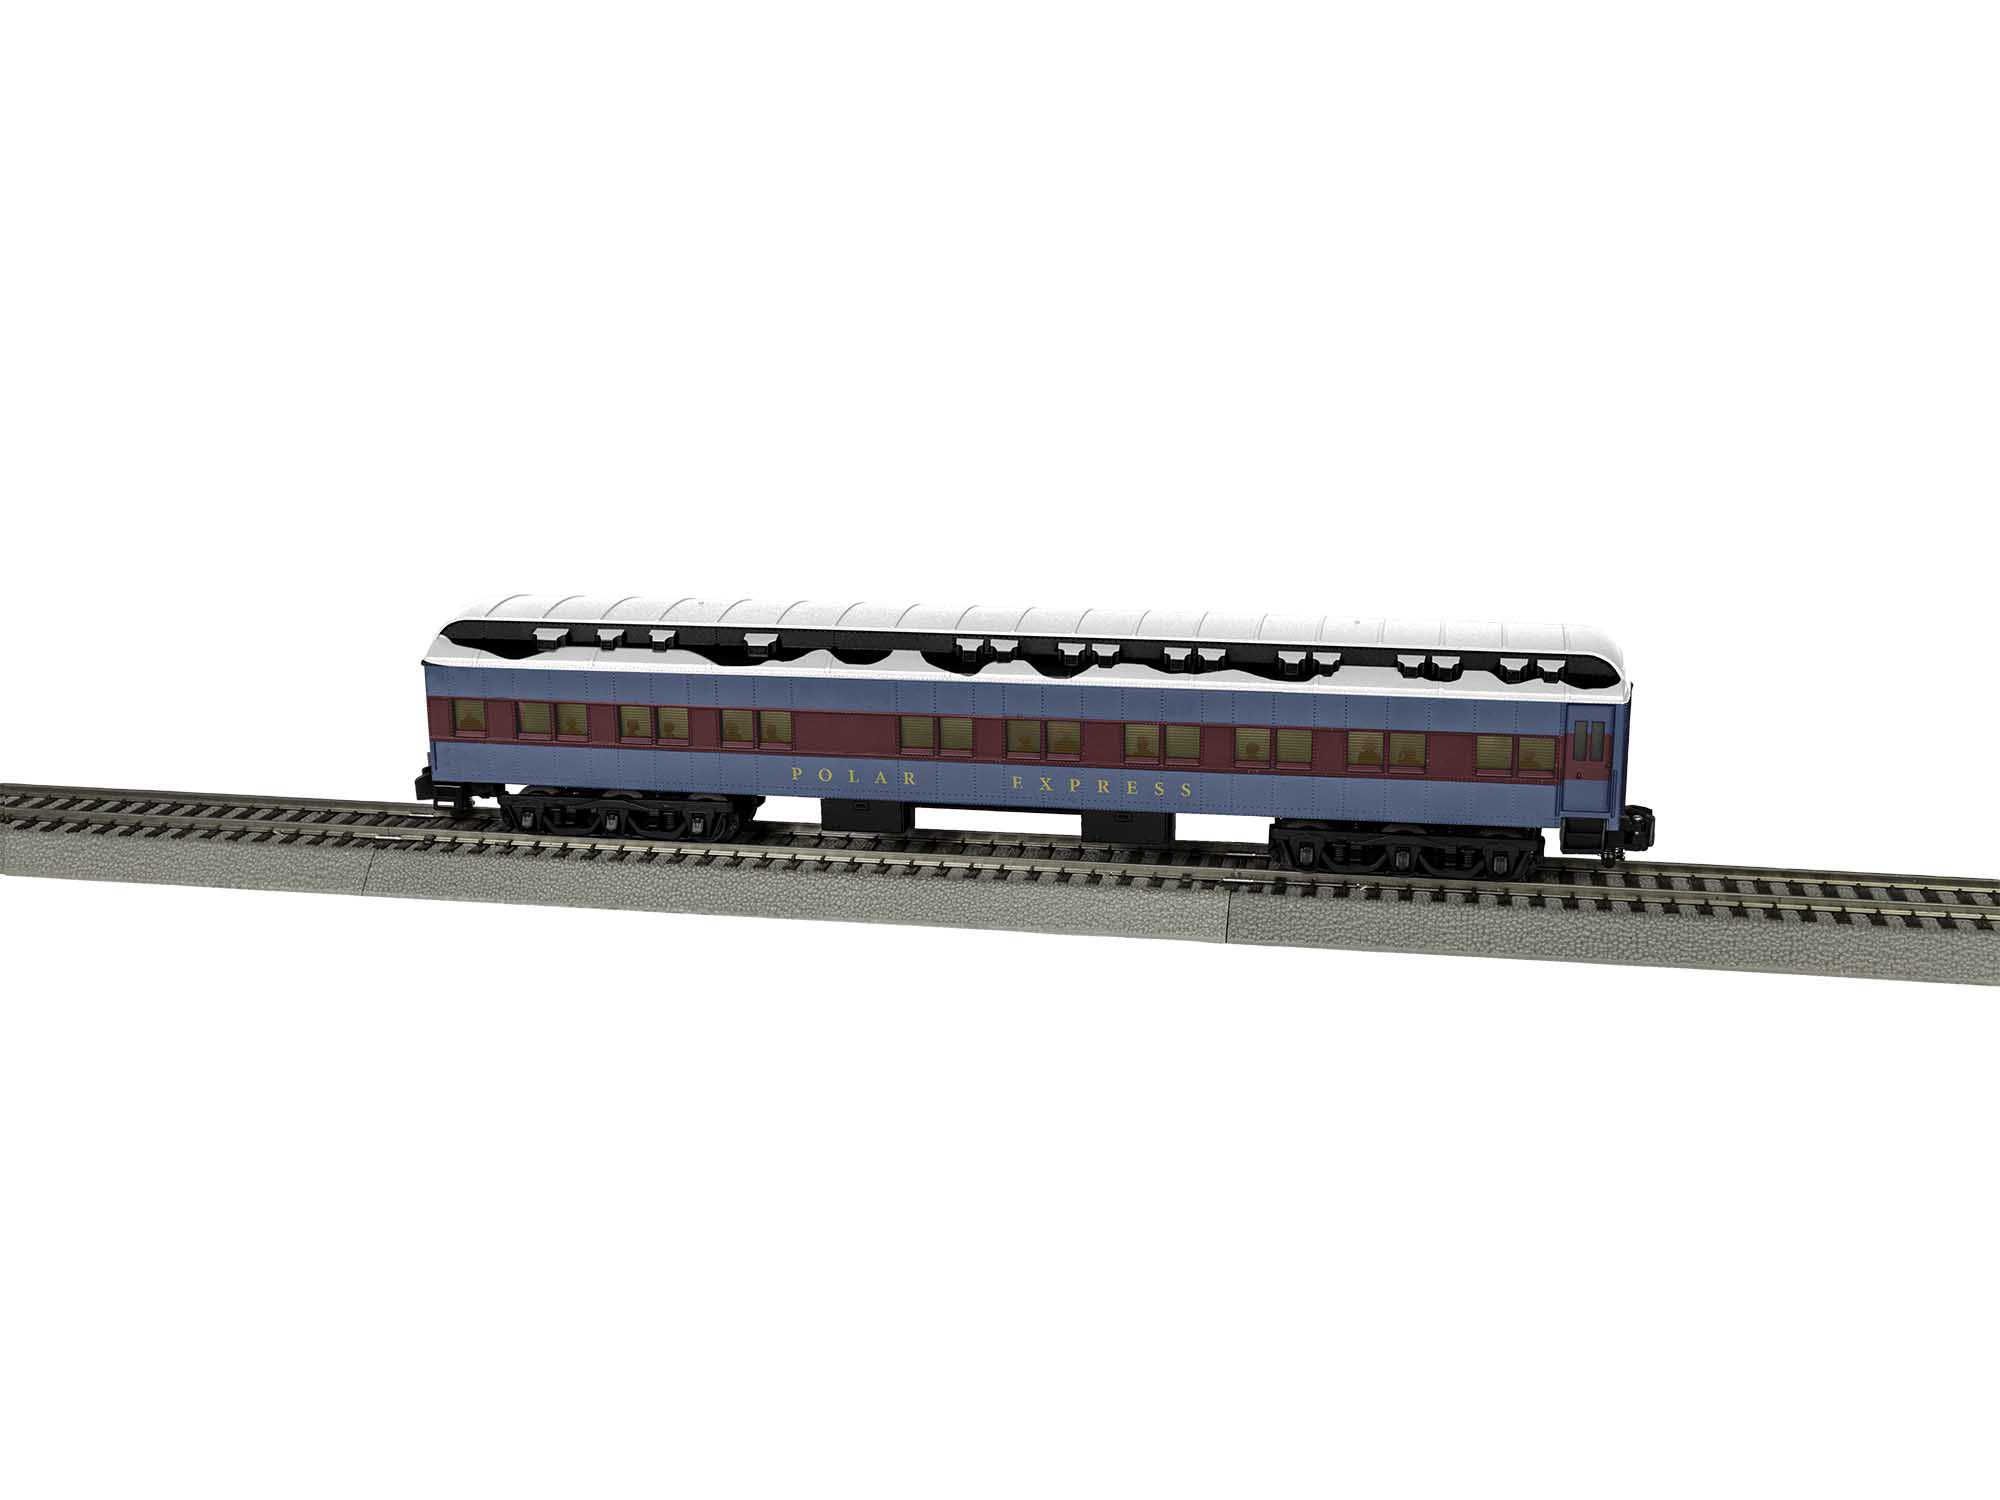 Lionel 2019220 S The Polar Express Dining Car